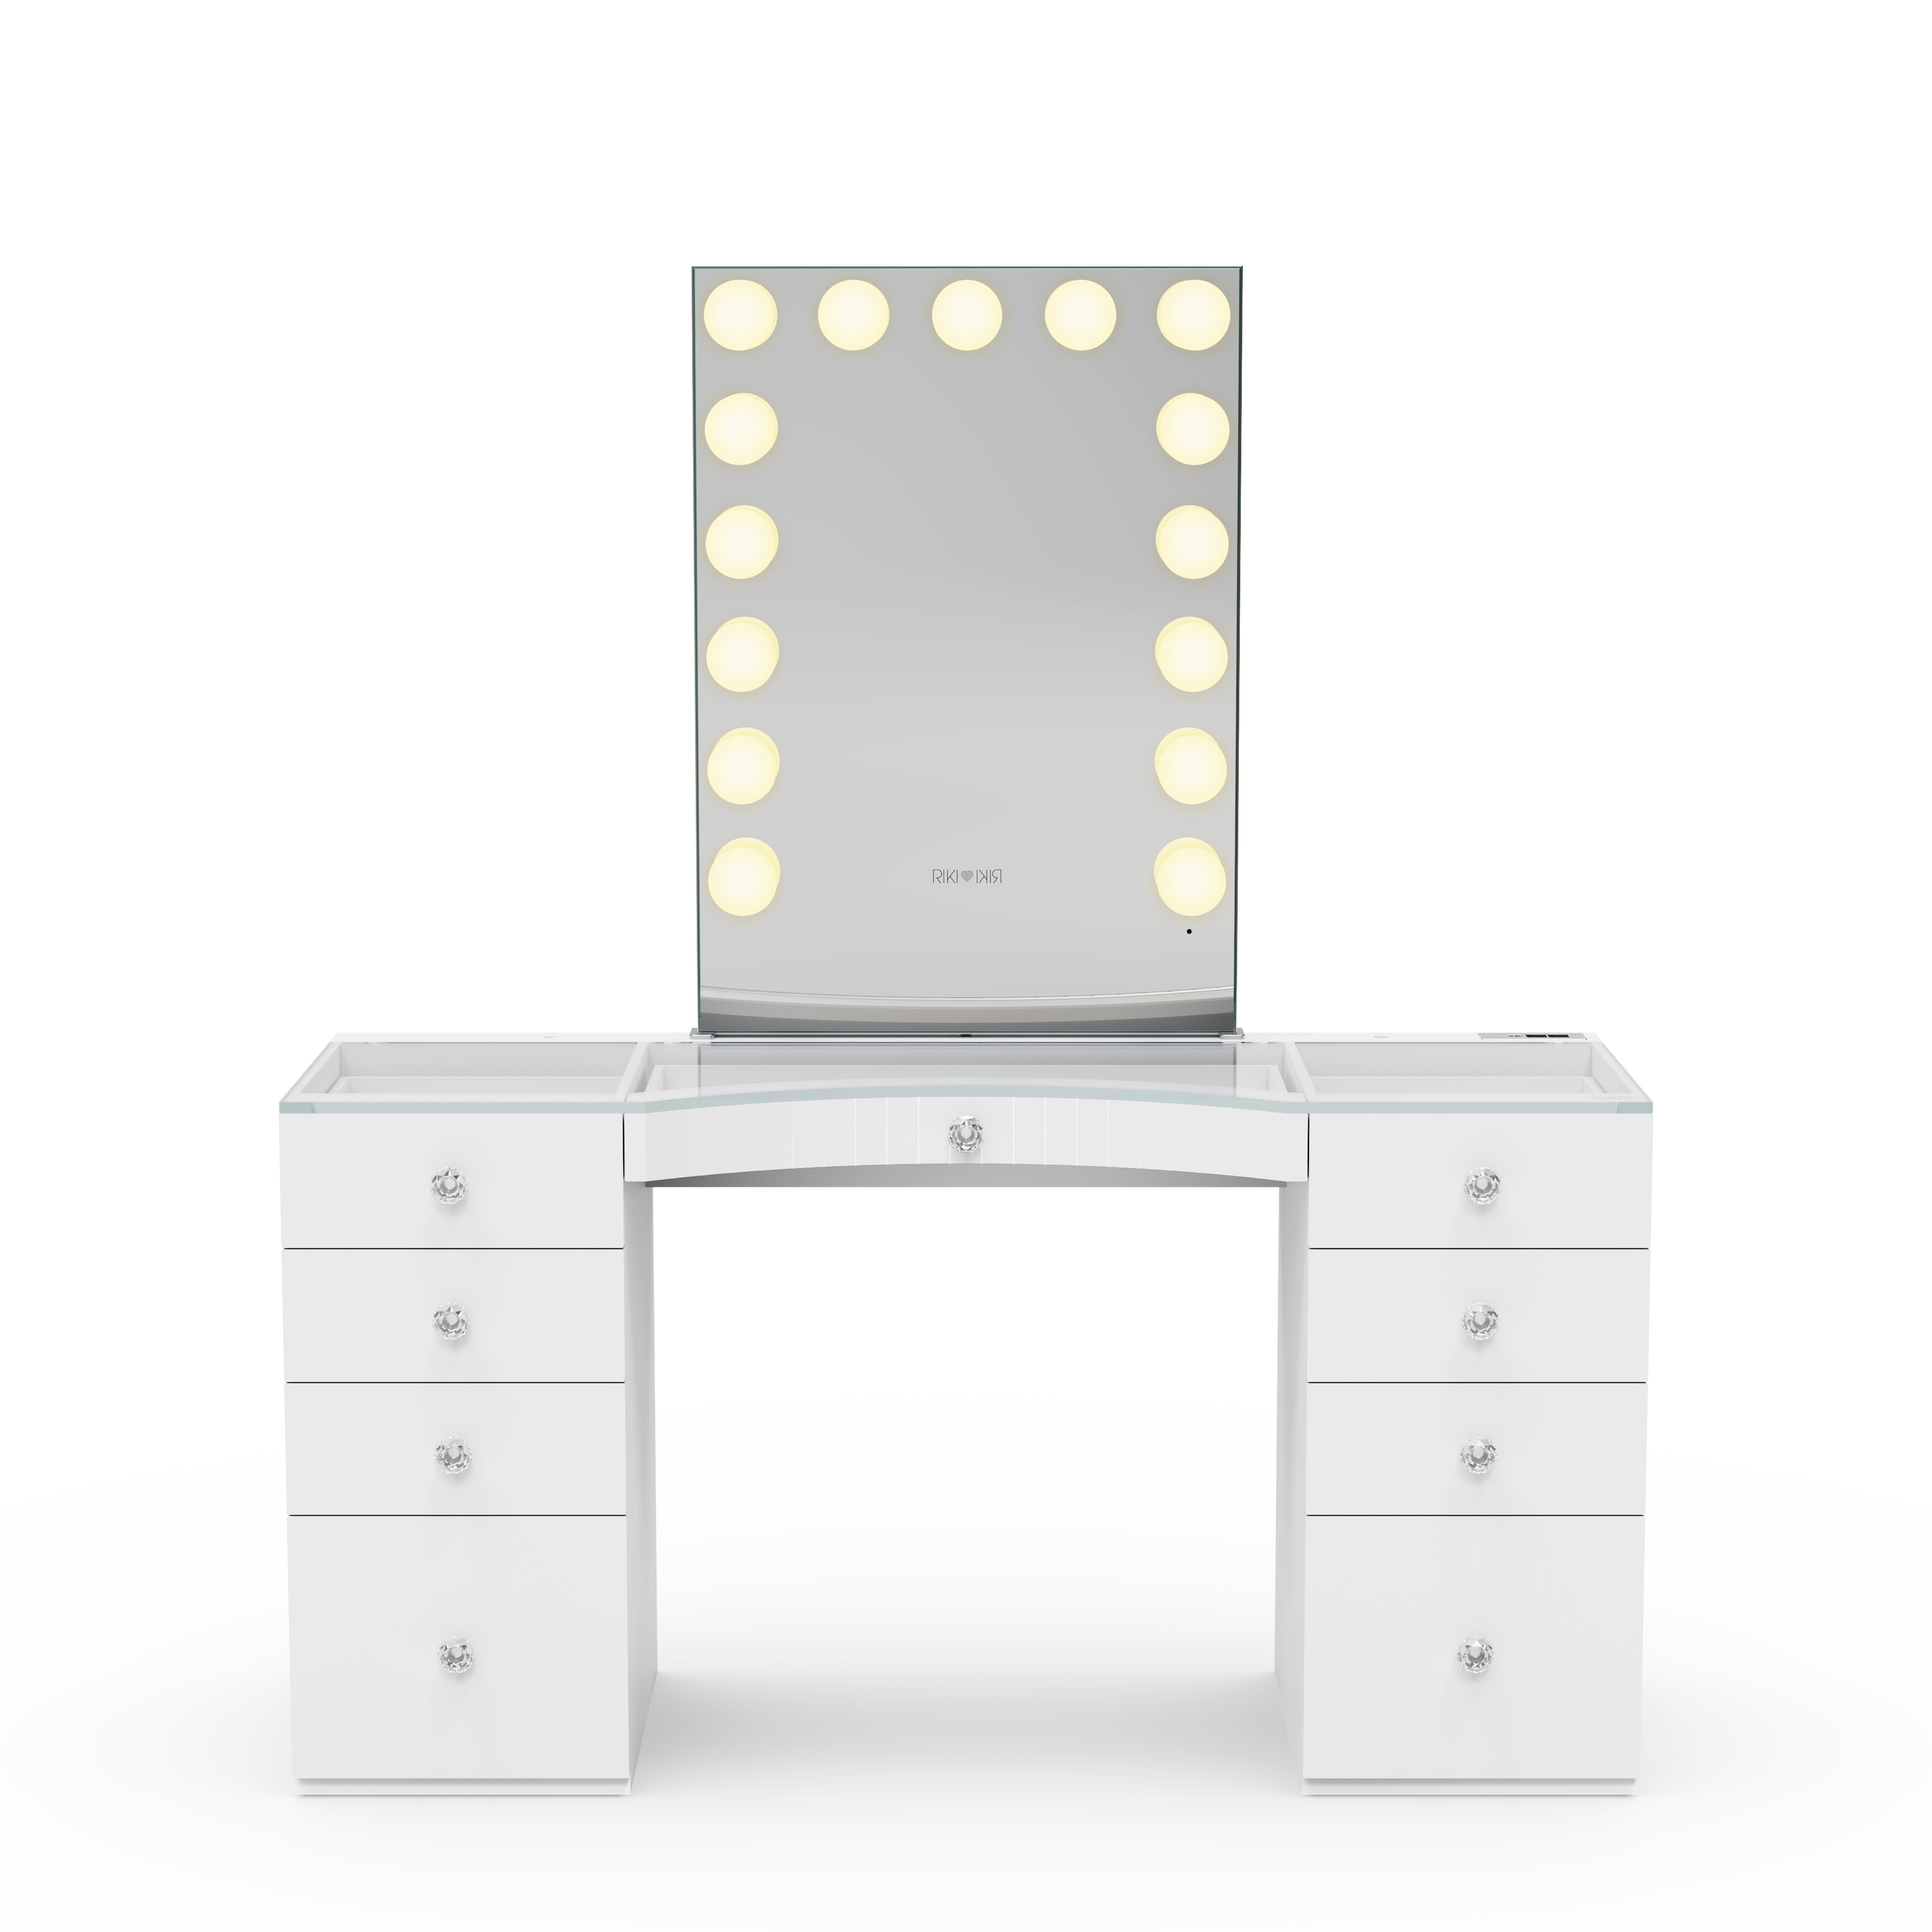 Unleash your inner beauty guru with the ergonomic carveout feature of the GLAMCOR Power Vanity, ensuring a comfortable makeup application experience. Add a iconic RIKI LOVES RIKI Hollywood makeup mirror with lights to the vanity table, completing your stunning functional beauty corner.